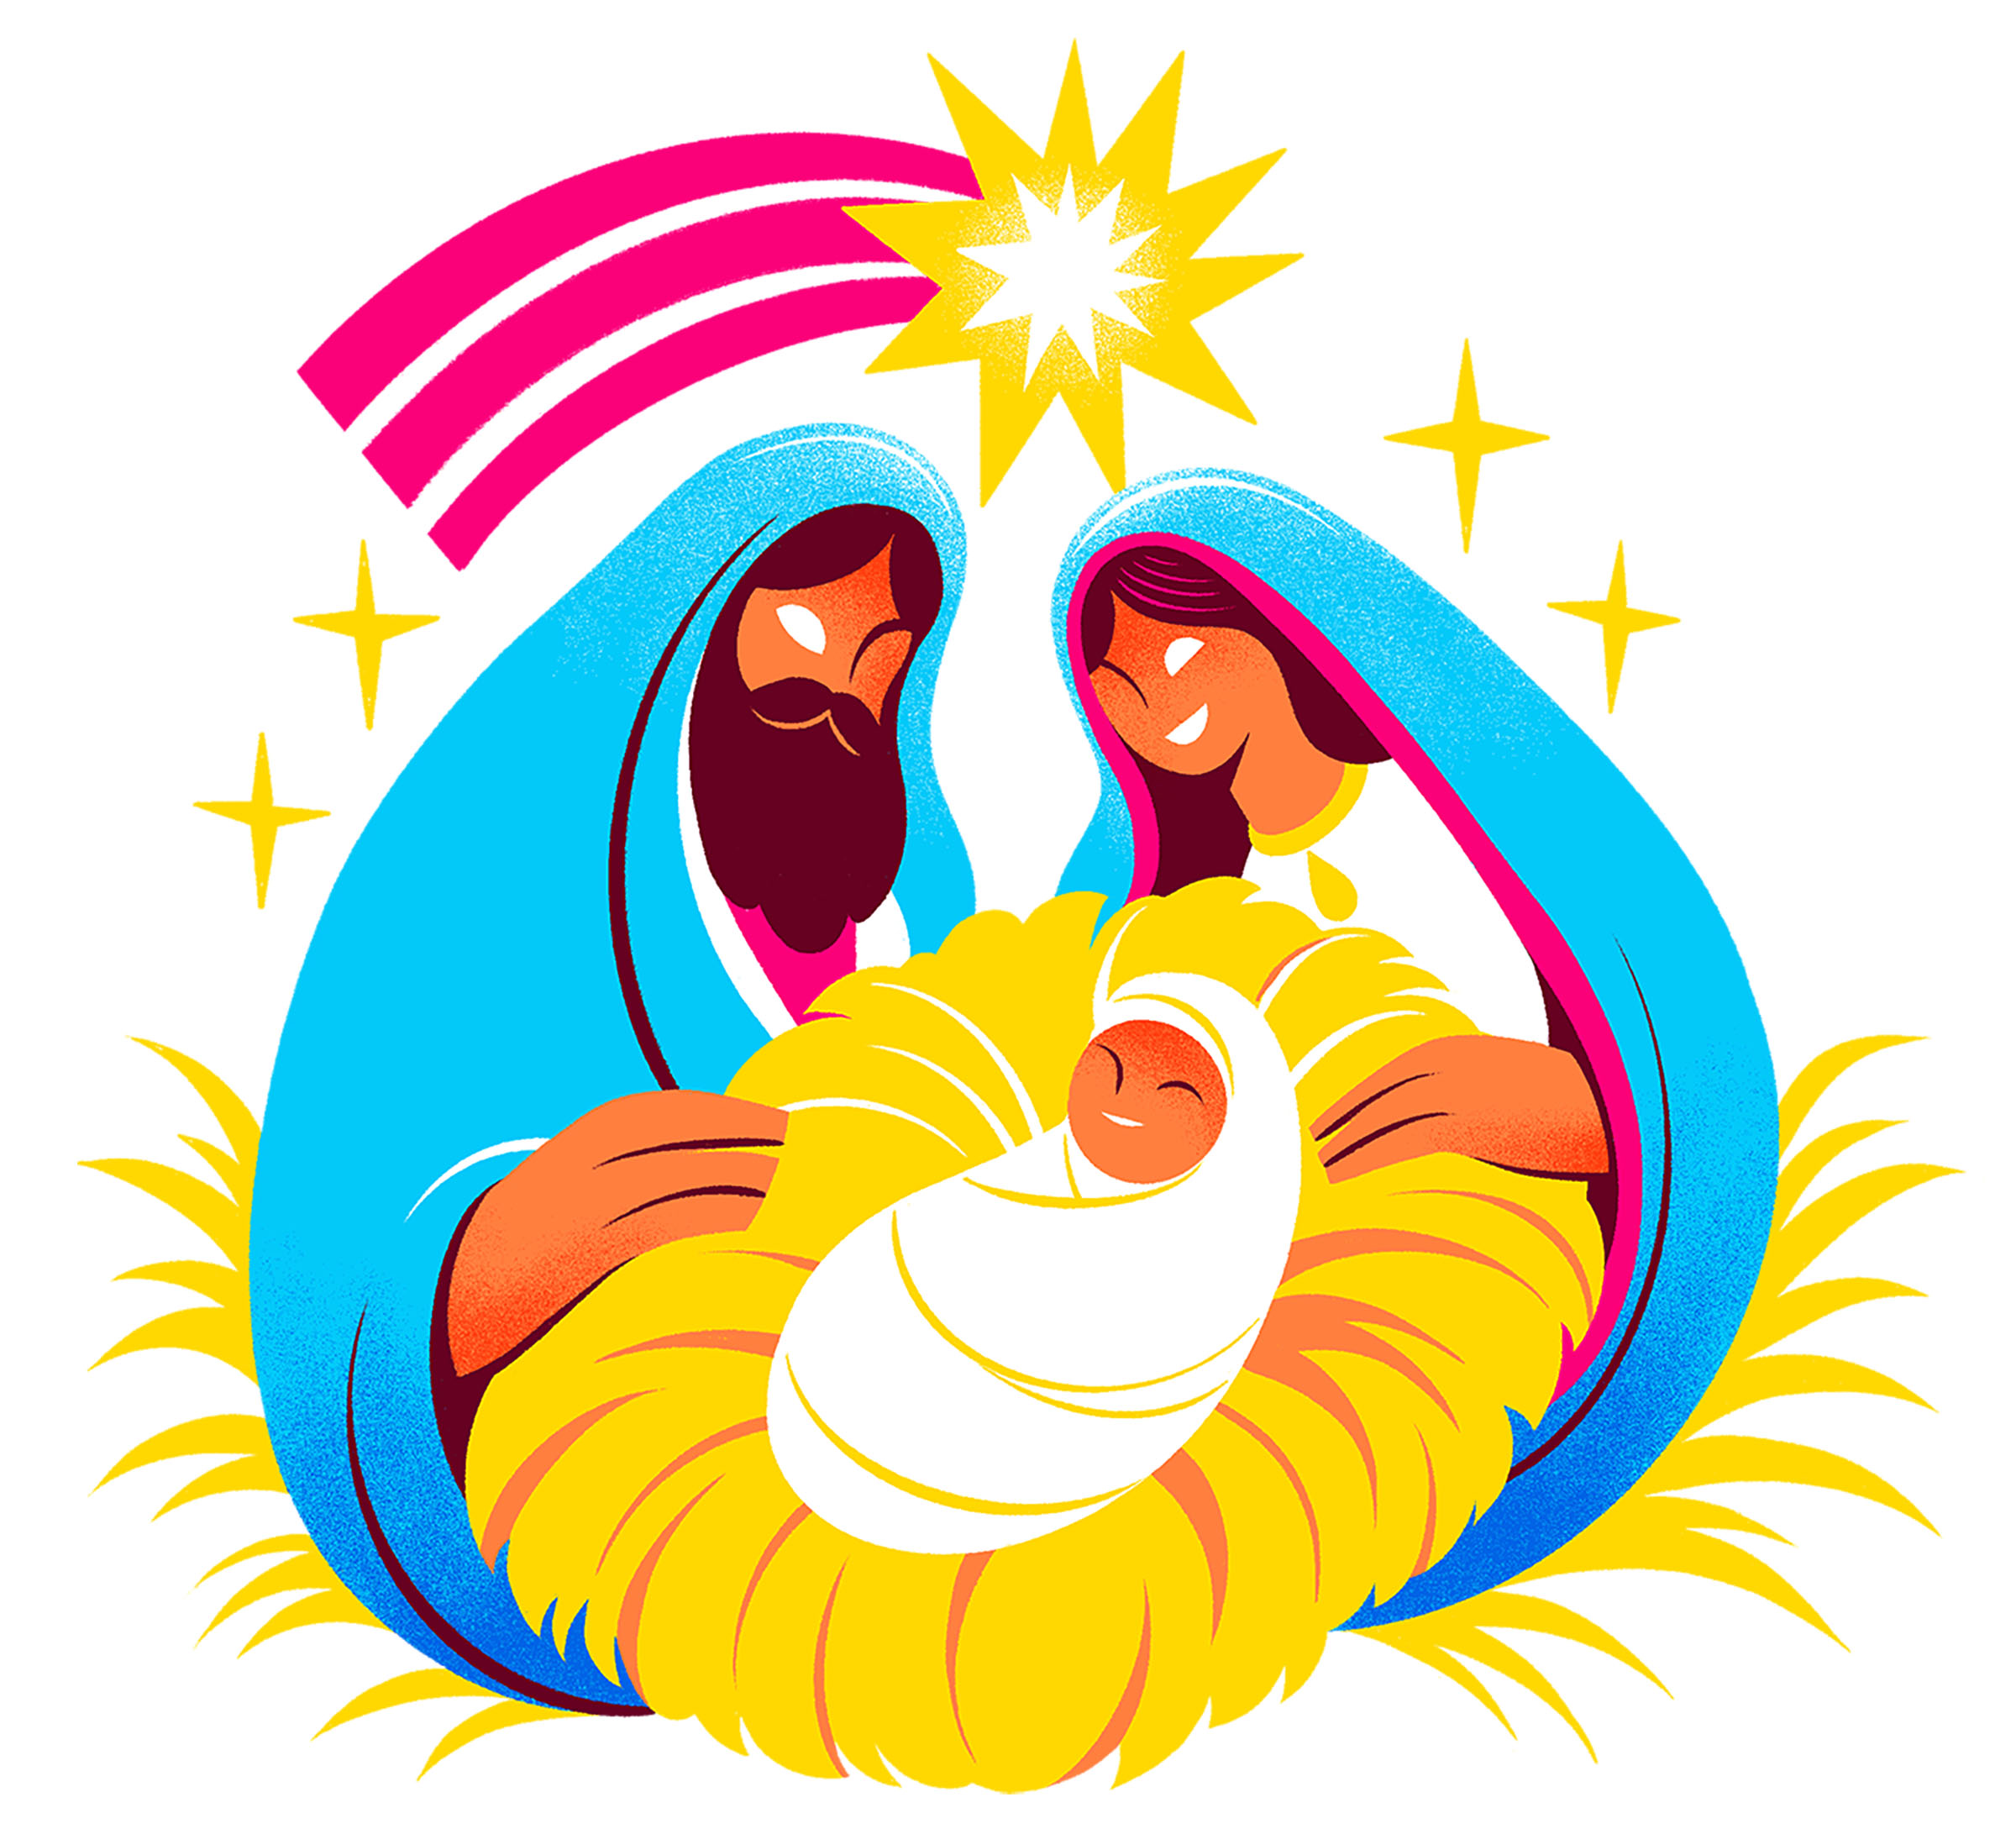 An illustration of Mary and Joseph celebrating the birth of Christ under a shooting star